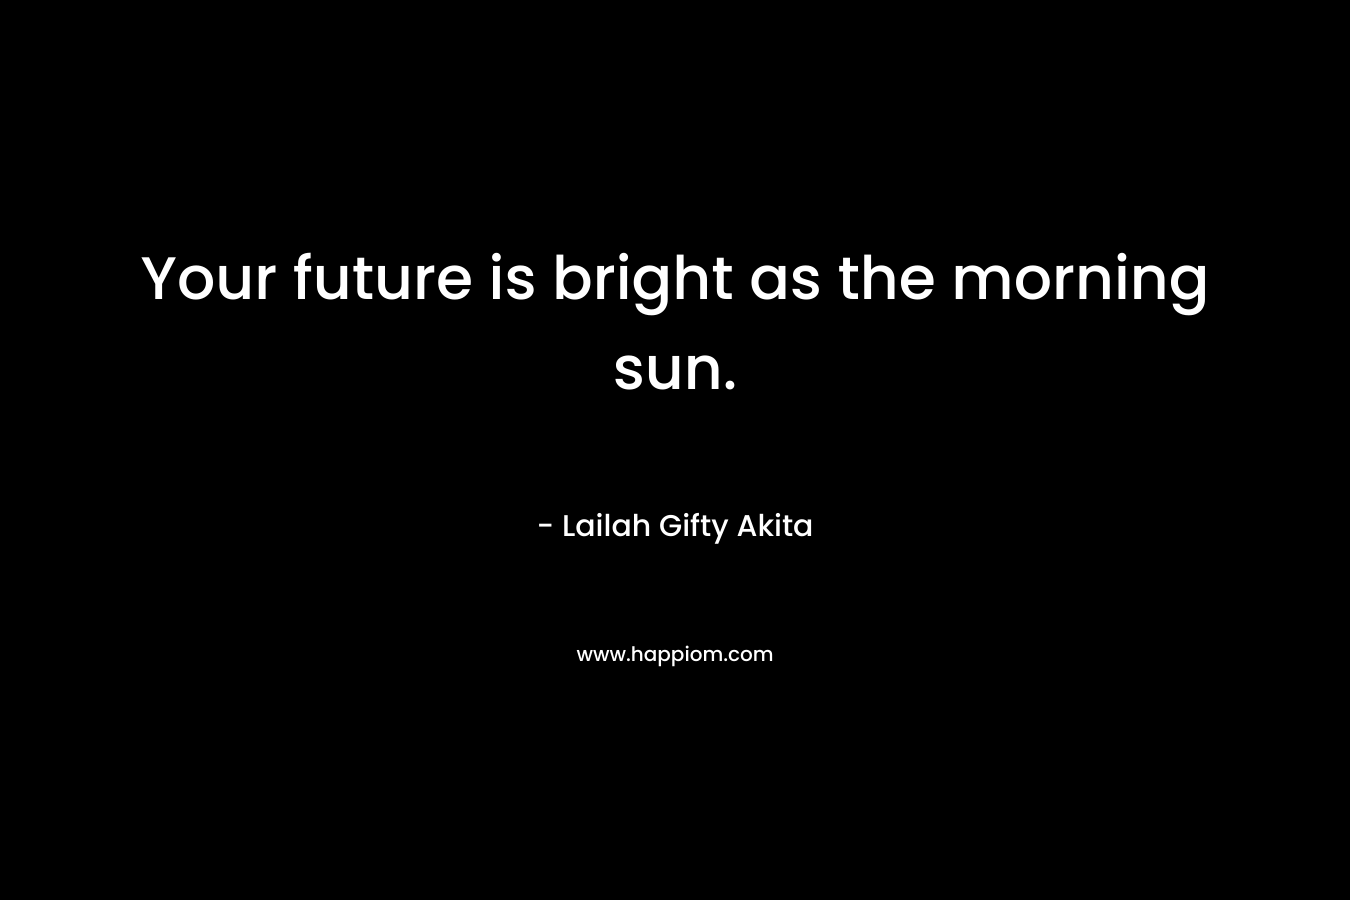 Your future is bright as the morning sun.